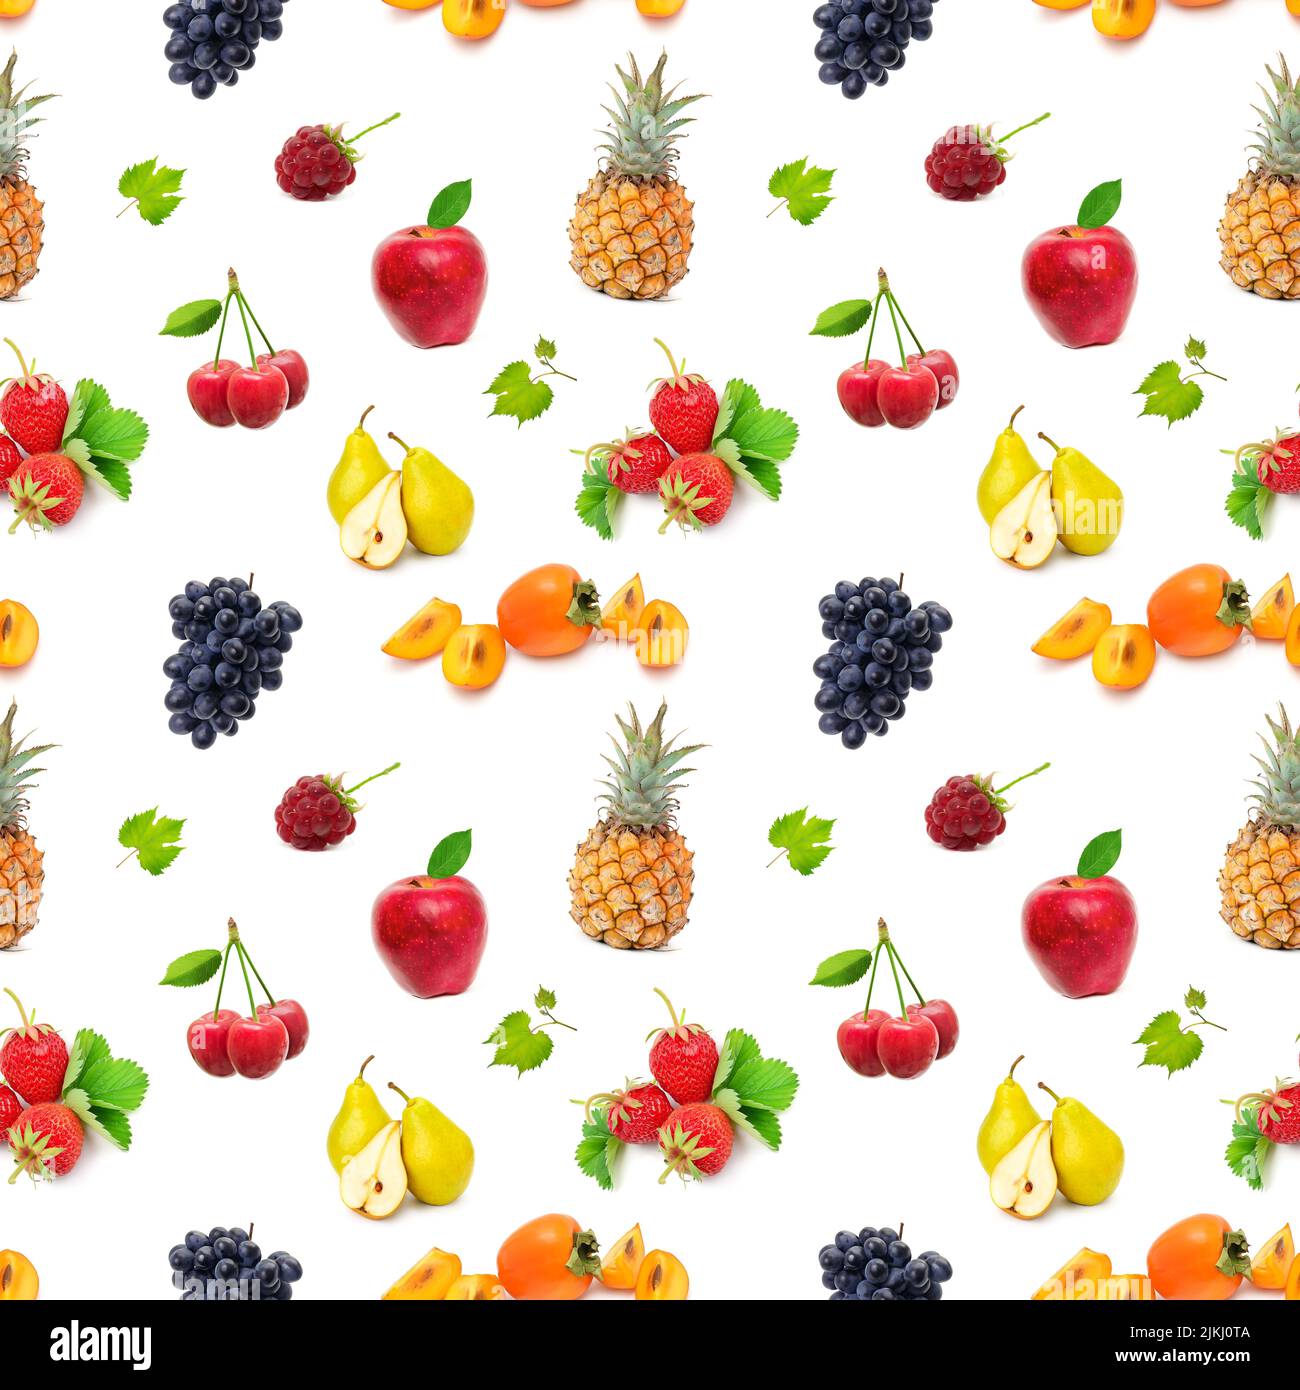 Stylized fruits isolated on white background. Seamless repeating pattern. Stock Photo